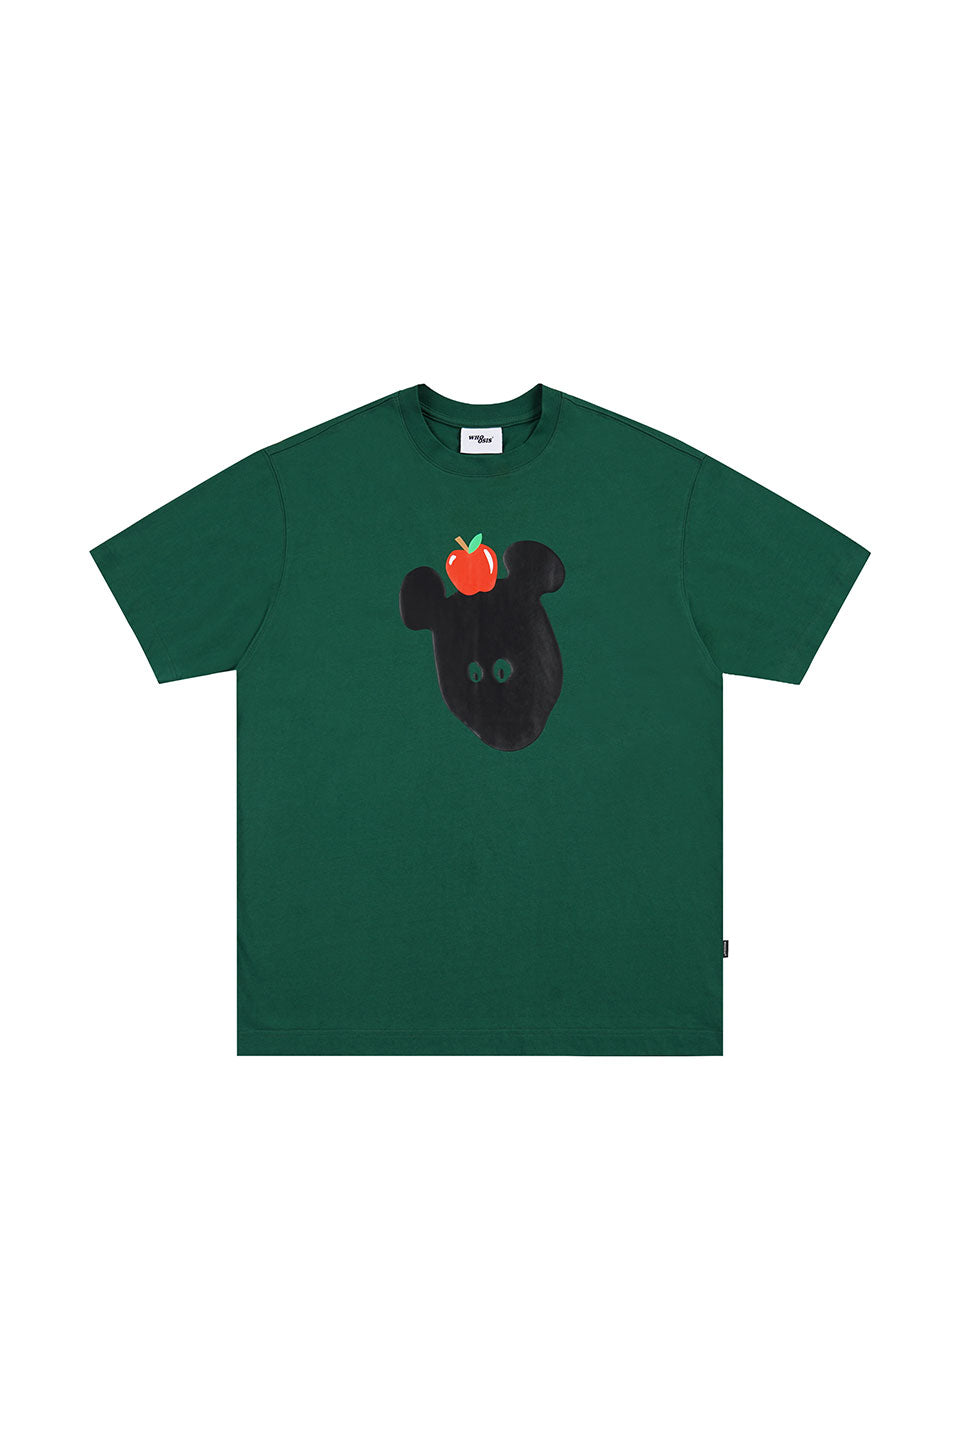 Tシャツ｜WHOOSIS (フーシス)｜Apple letter printing SS Tee｜公式